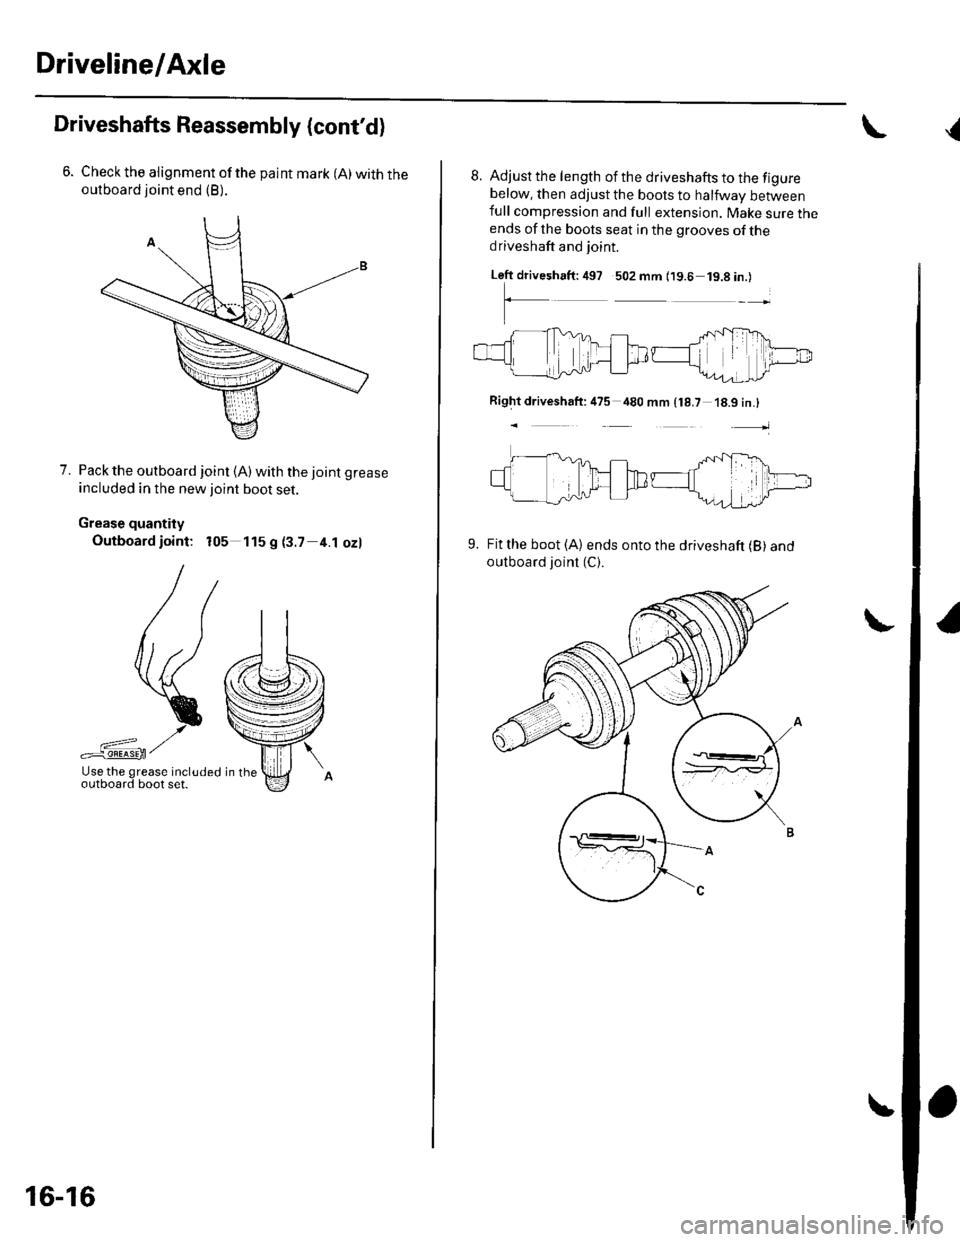 HONDA CIVIC 2003 7.G Workshop Manual Driveline/Axle
Driveshafts Reassembly (contd)
Check the alignment of the paint mark (A) with theoutboard joint end (B).
7. Pack the outboard joint (A)with the joint grease
included in the new ioint b